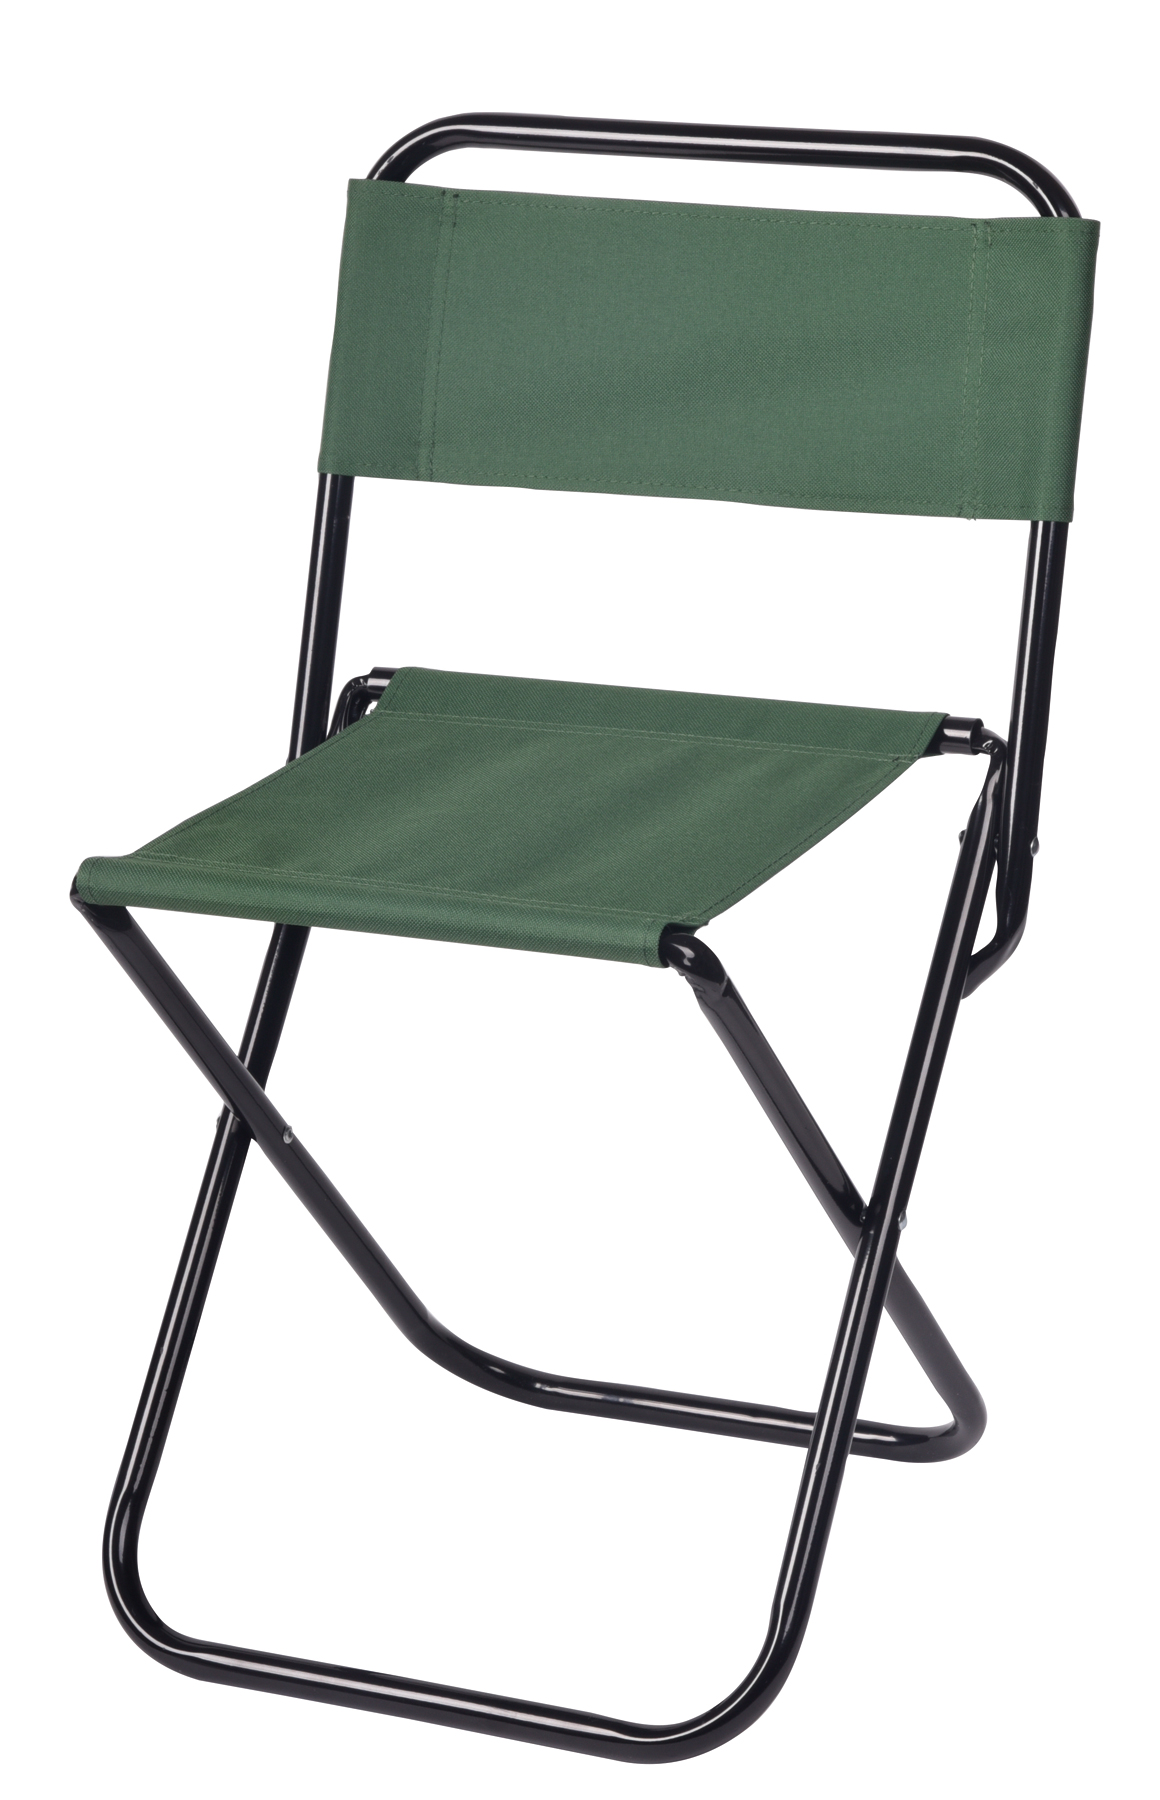 Folding camping chair TAKEOUT - green